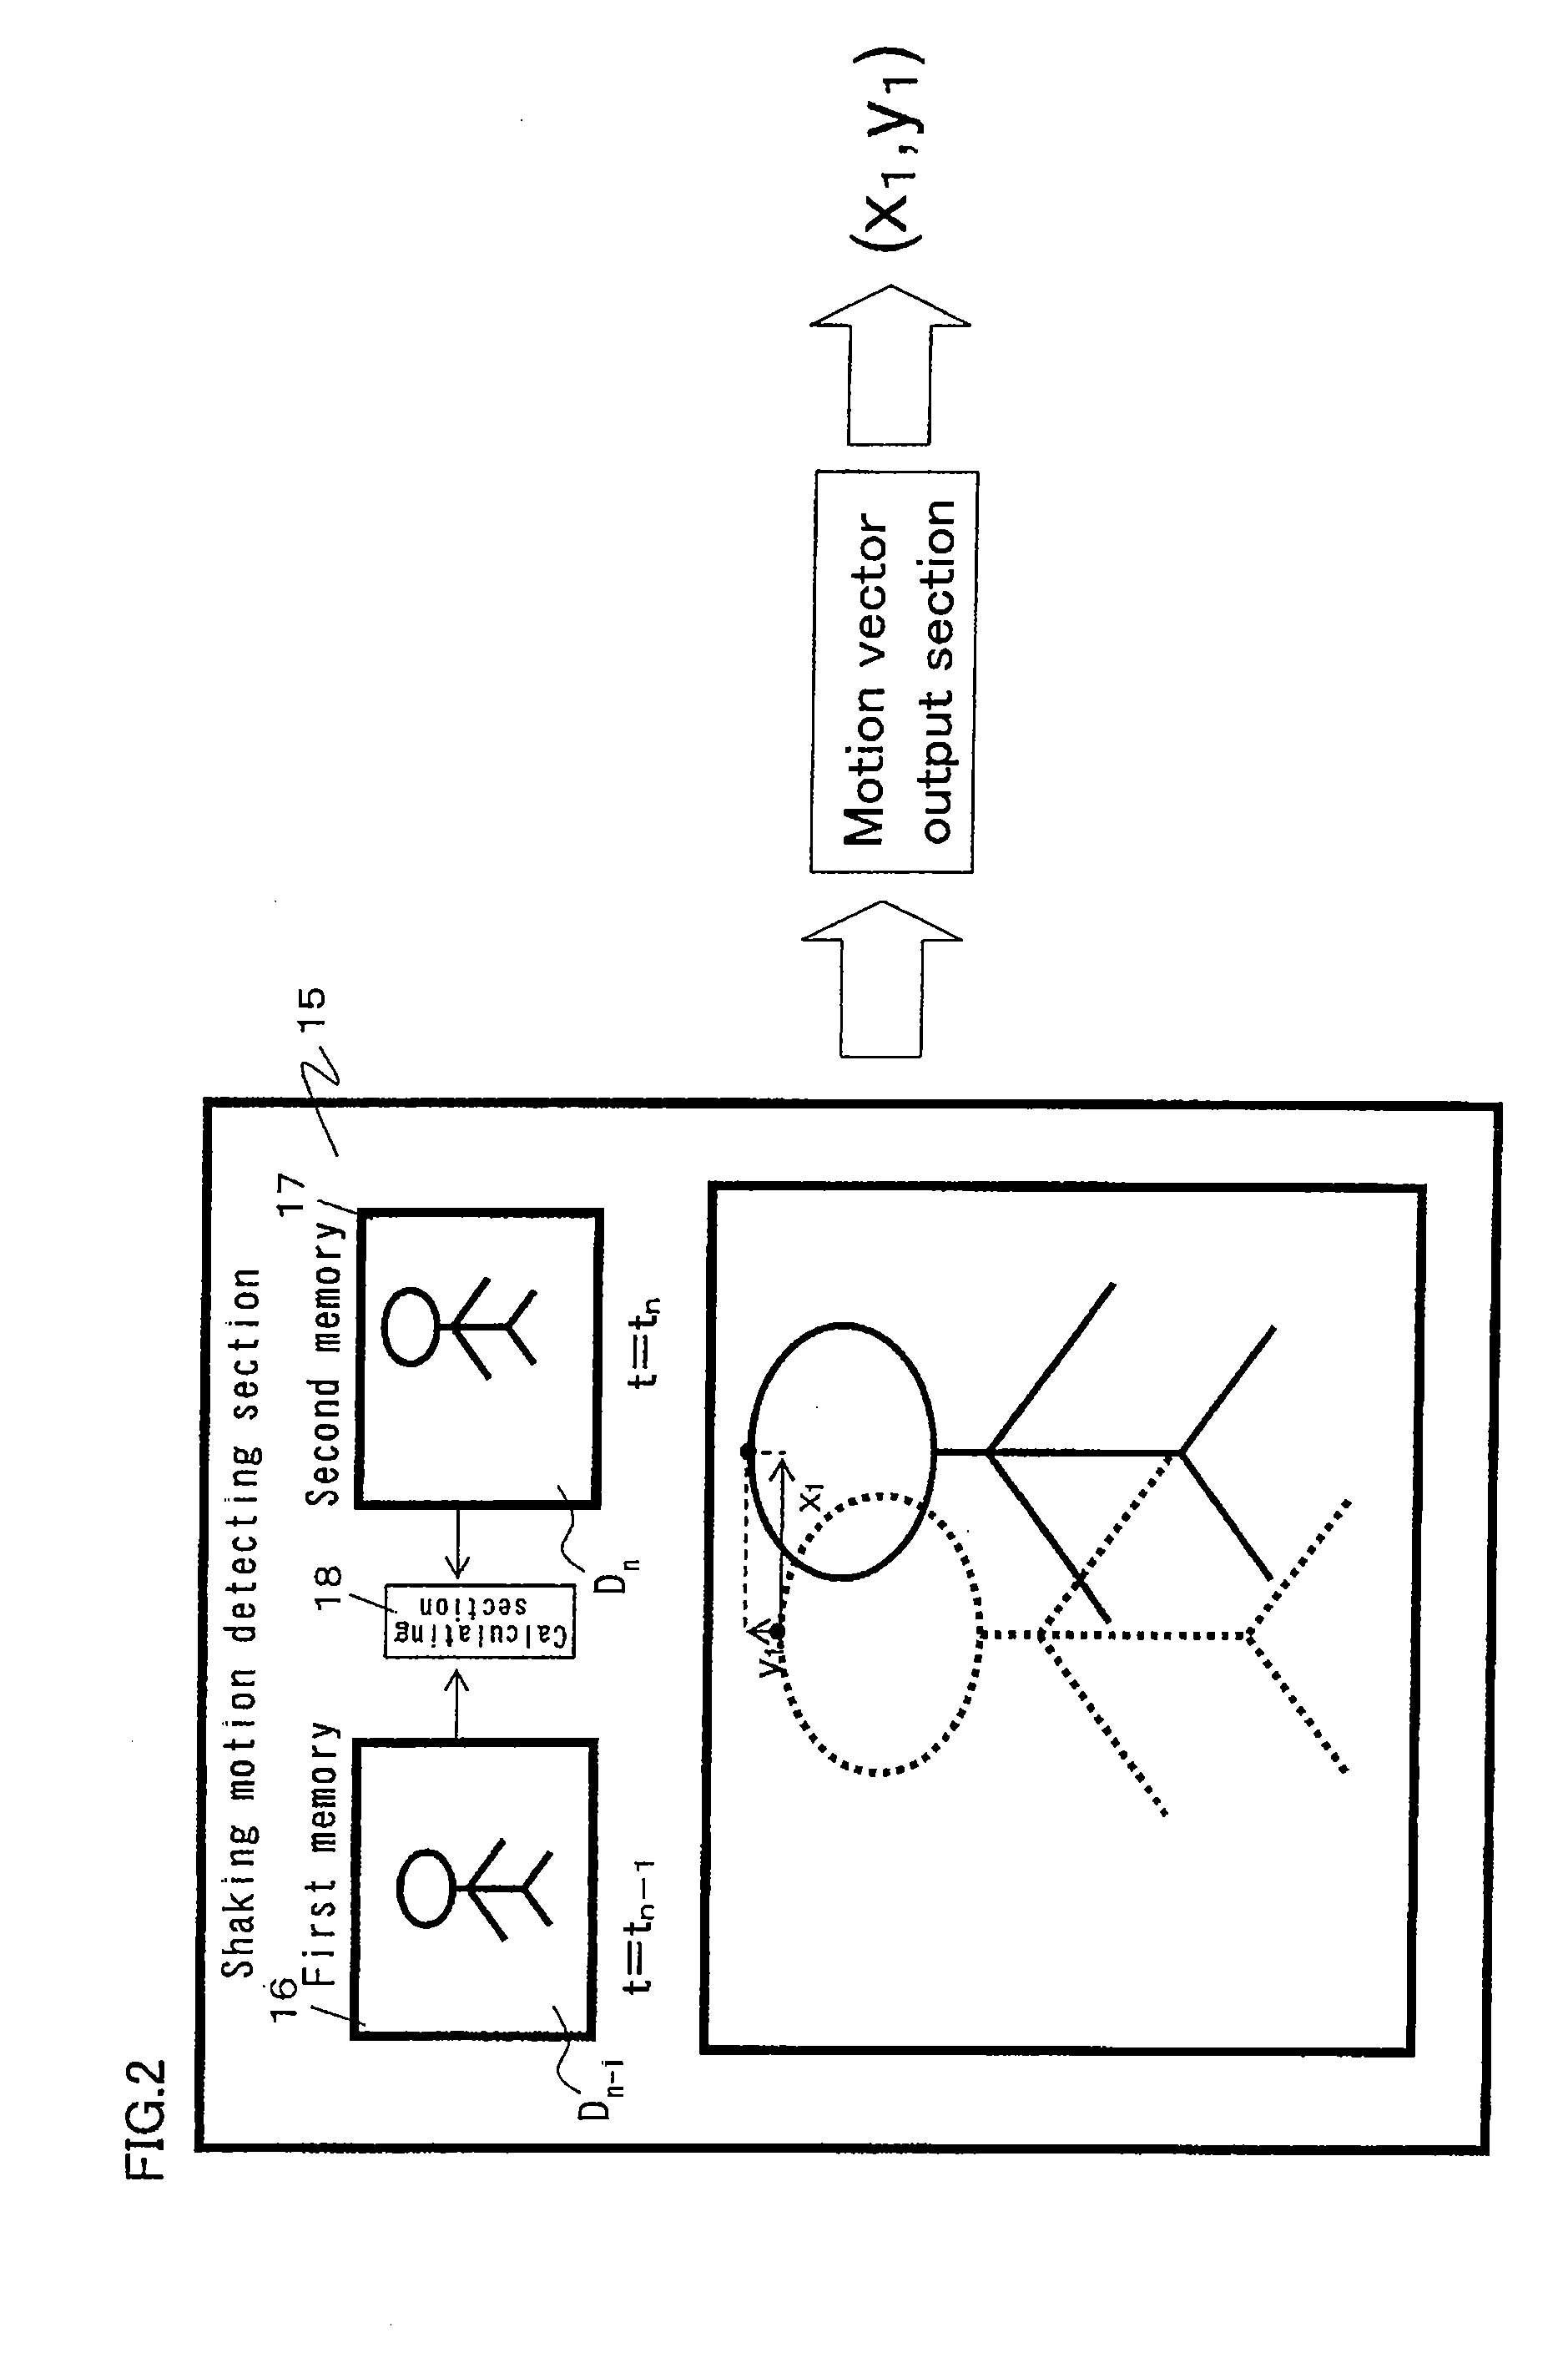 Imaging Device, Product Package, and Semiconductor Integrated Circuit